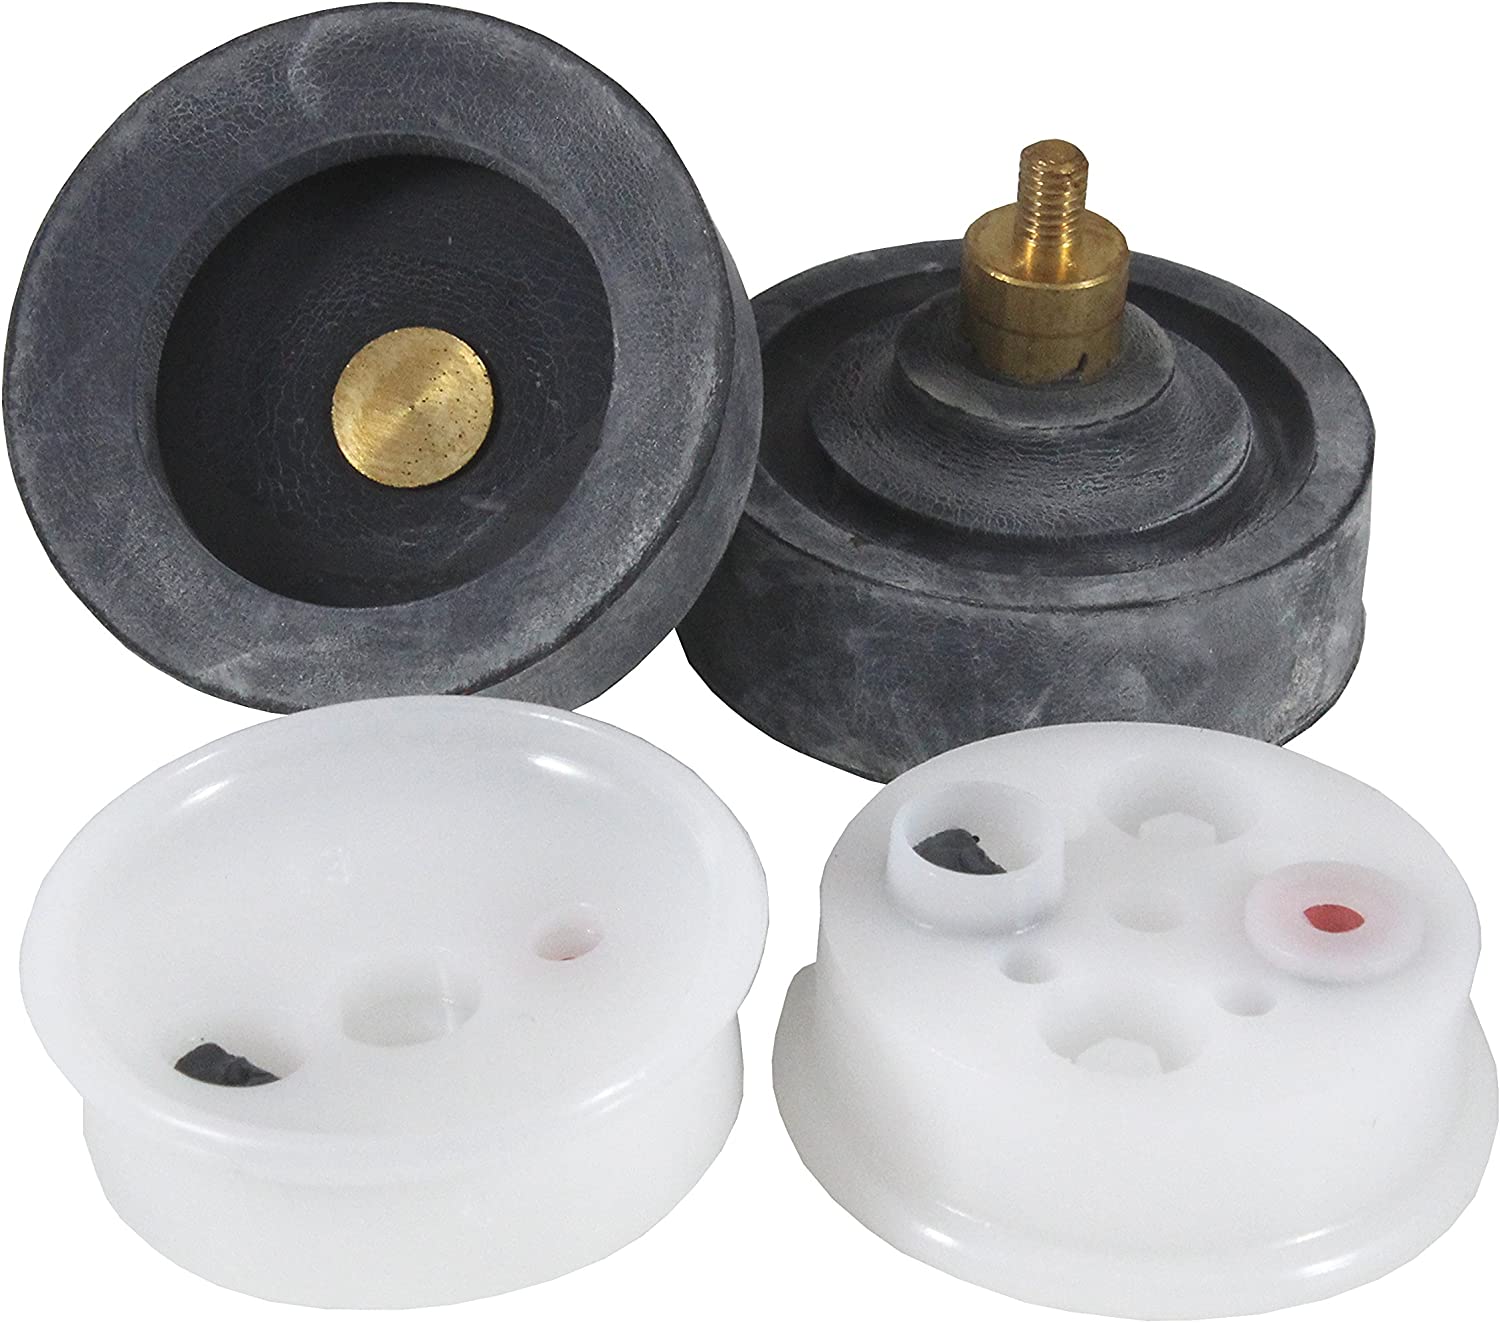 Spare diaphragm with Schego Optimal head